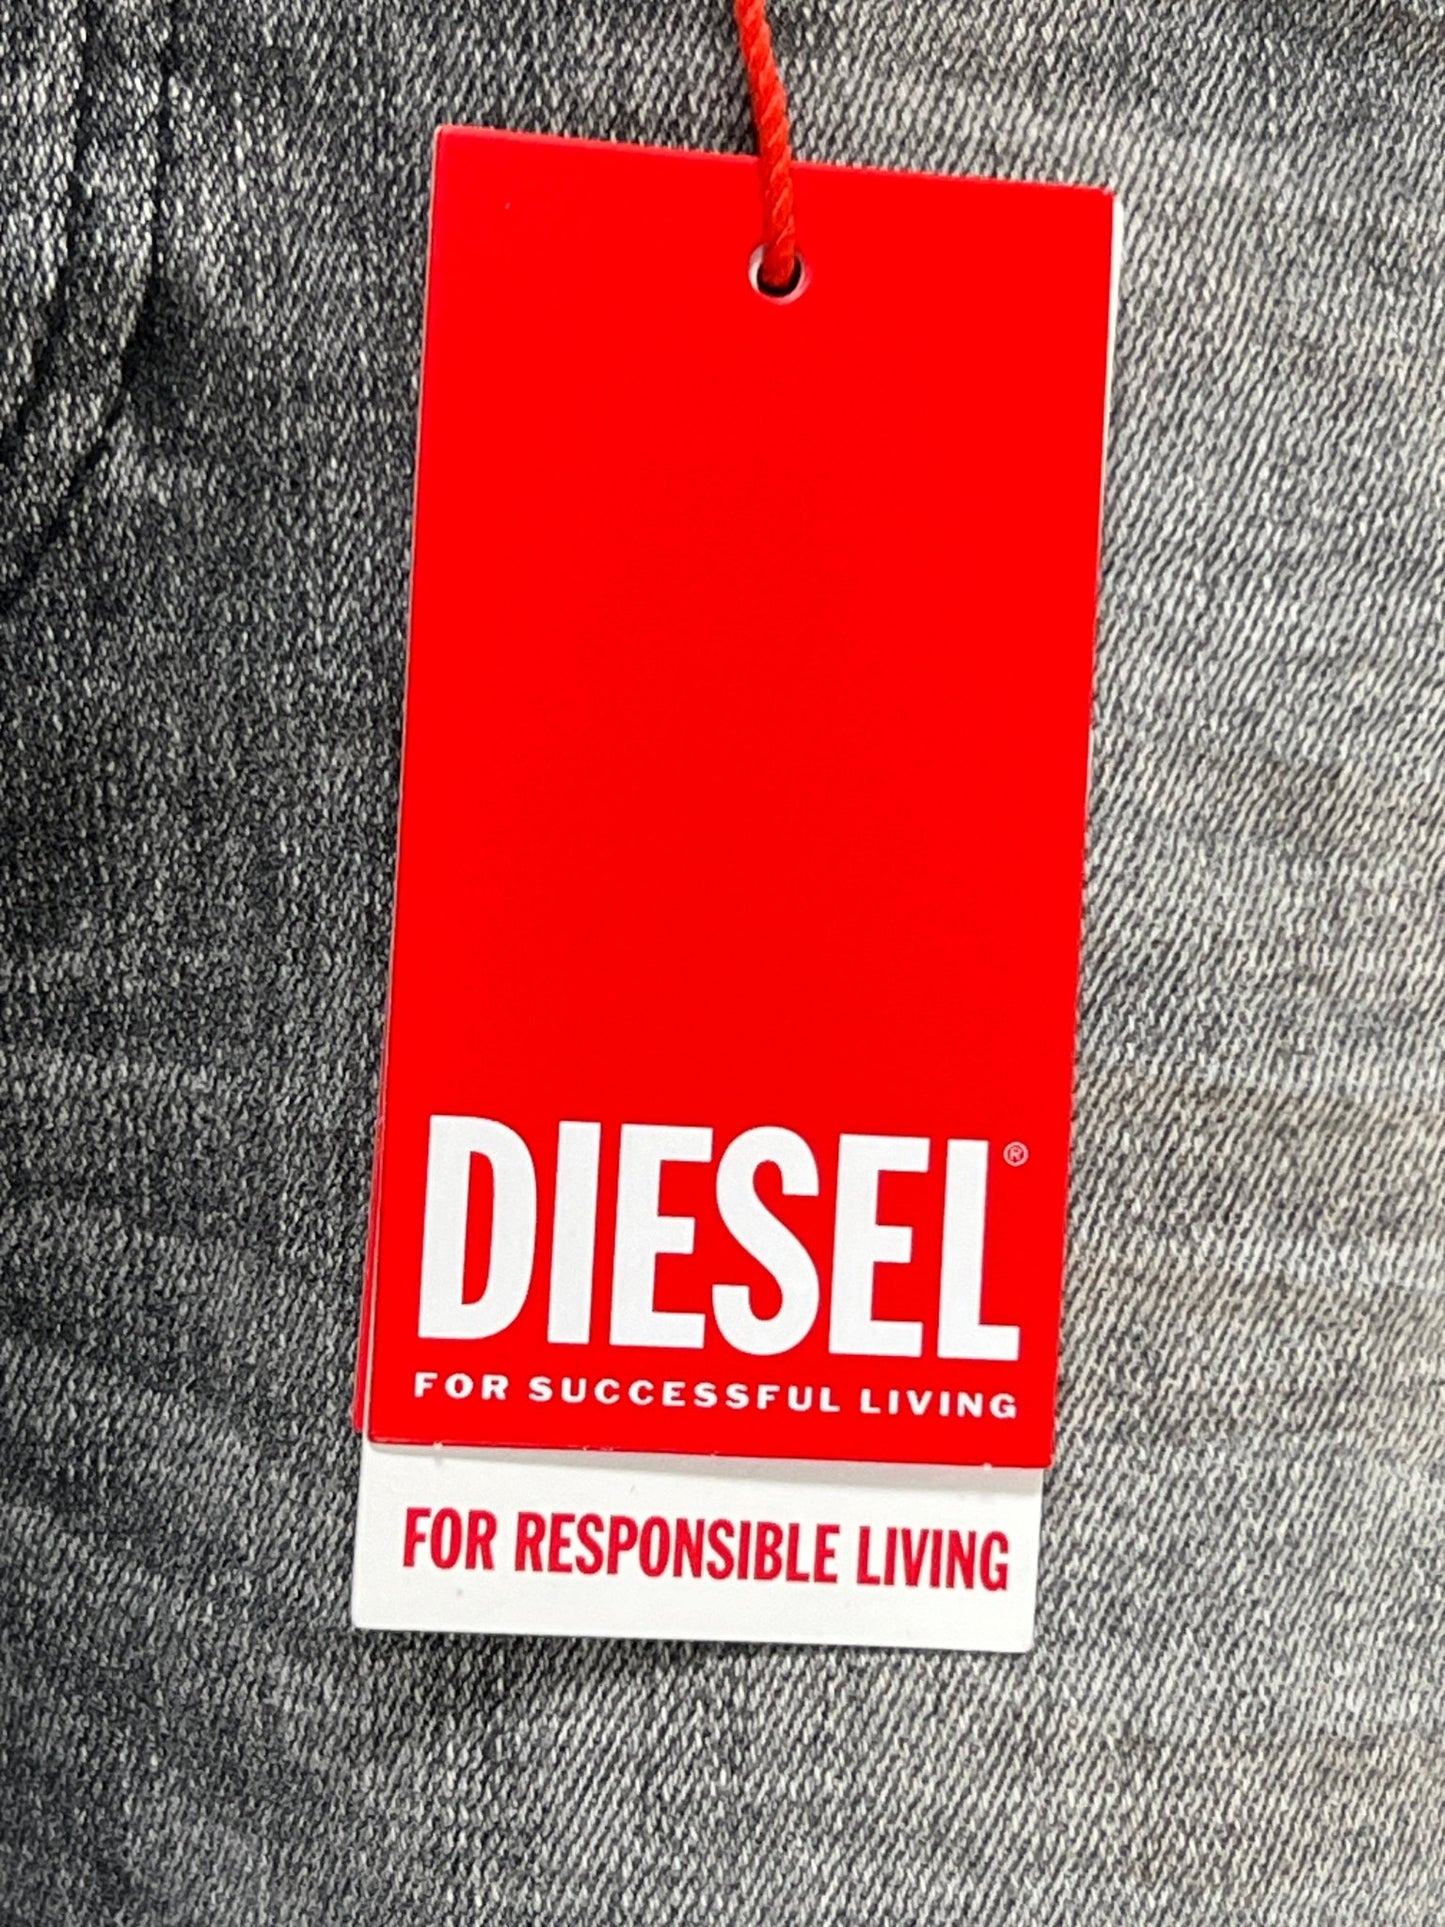 A red DIESEL denim clothing tag with the slogan "for successful living" and "for responsible living" on a textured gray background. This tag is associated with organic cotton skinny jeans.